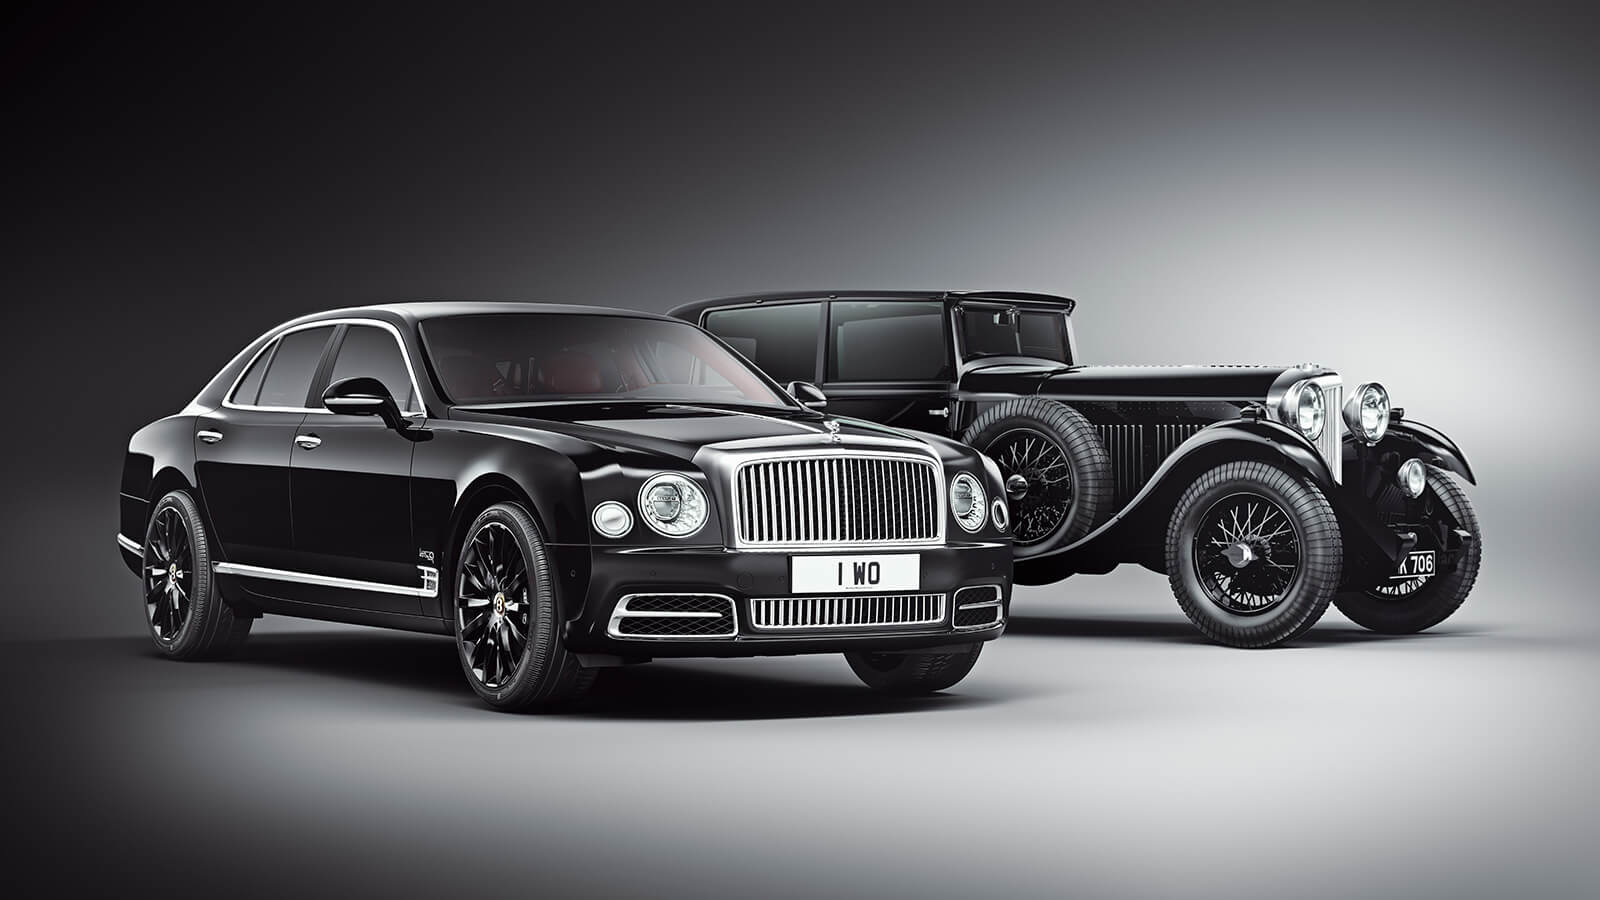 The Mulsanne W.O. Edition by Mulliner.